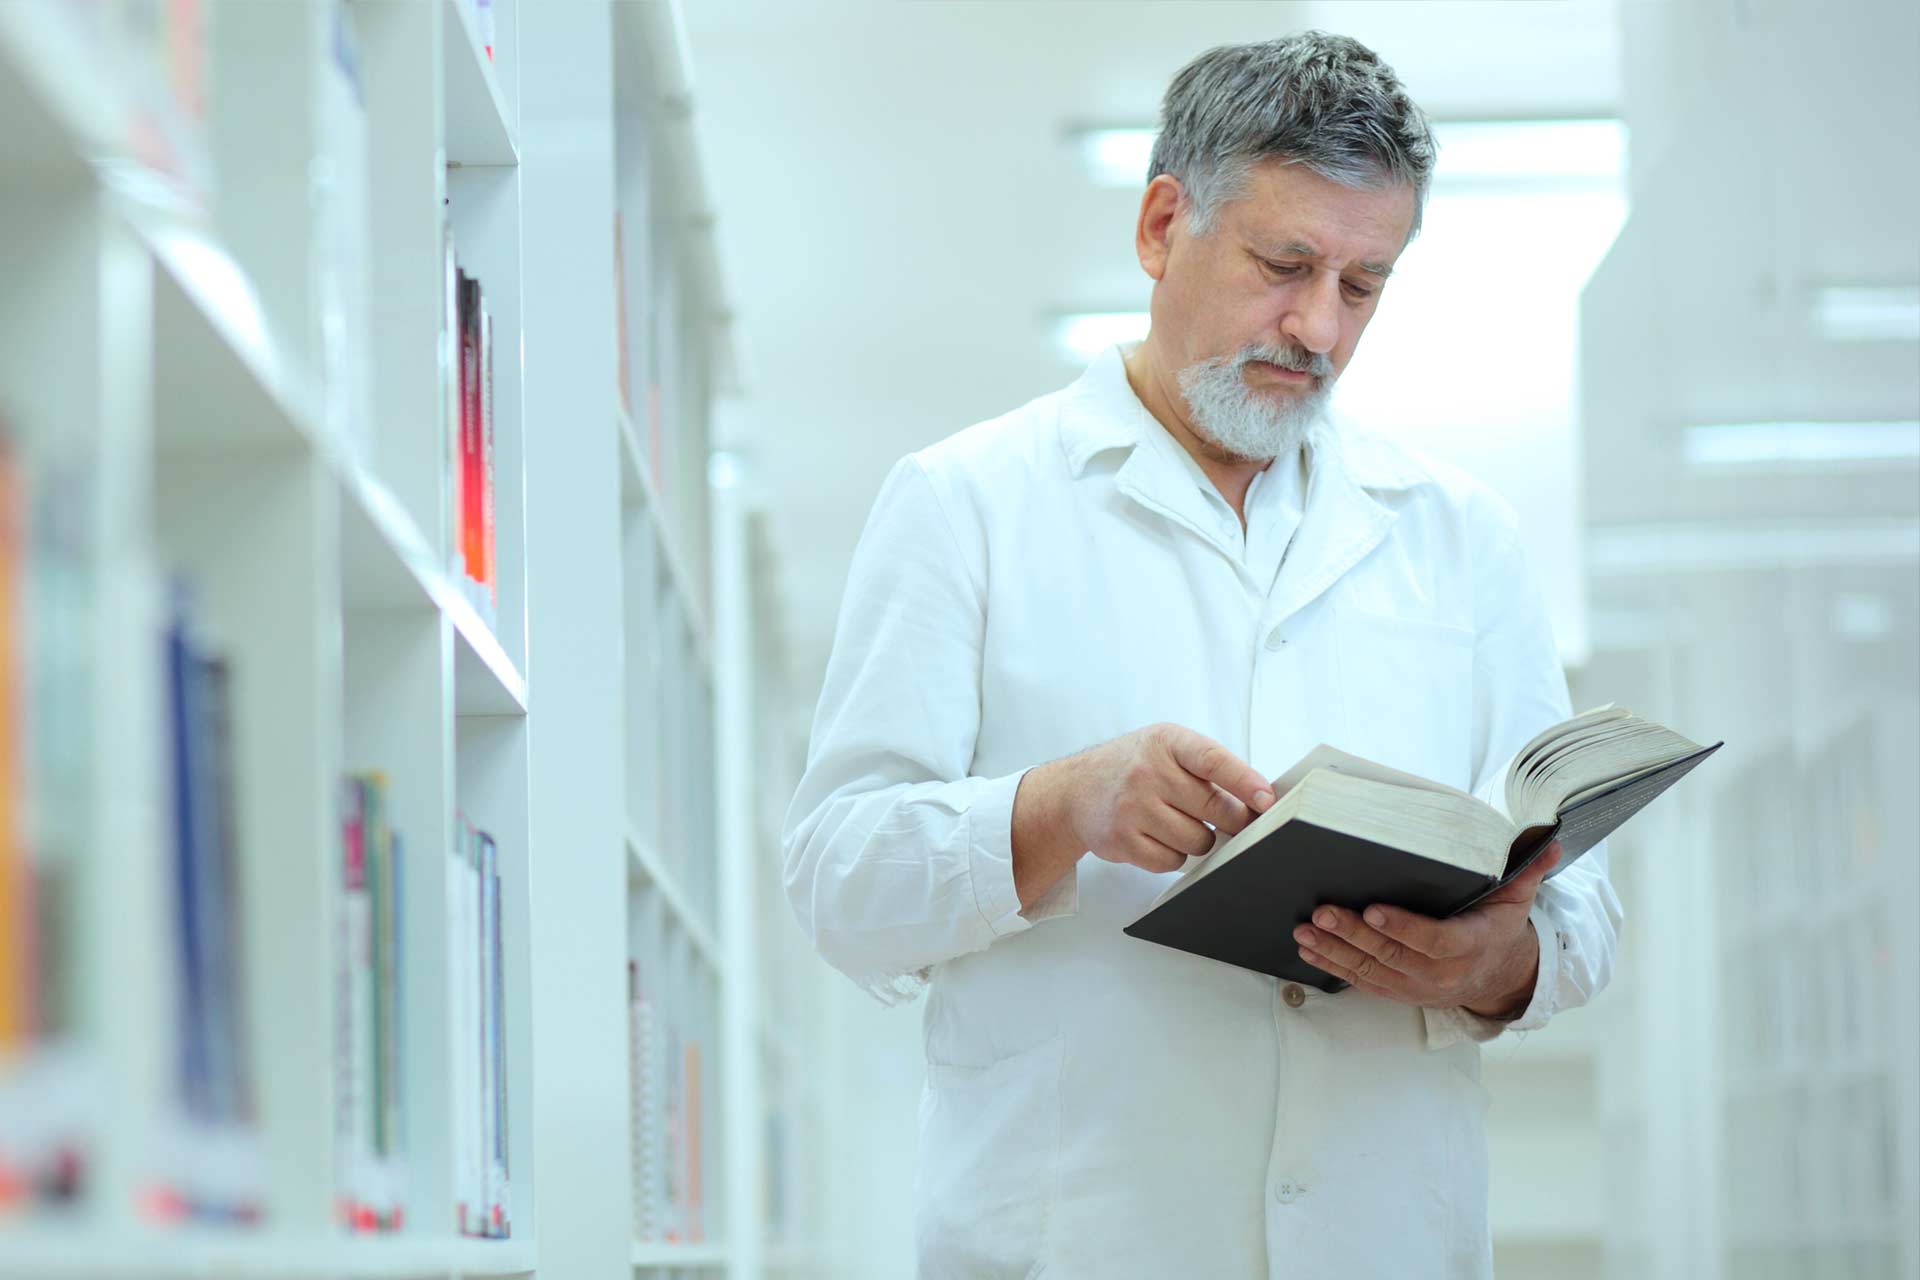 Male clinician in white coat reviewing cannabis research, standing in medical library holding thick book.